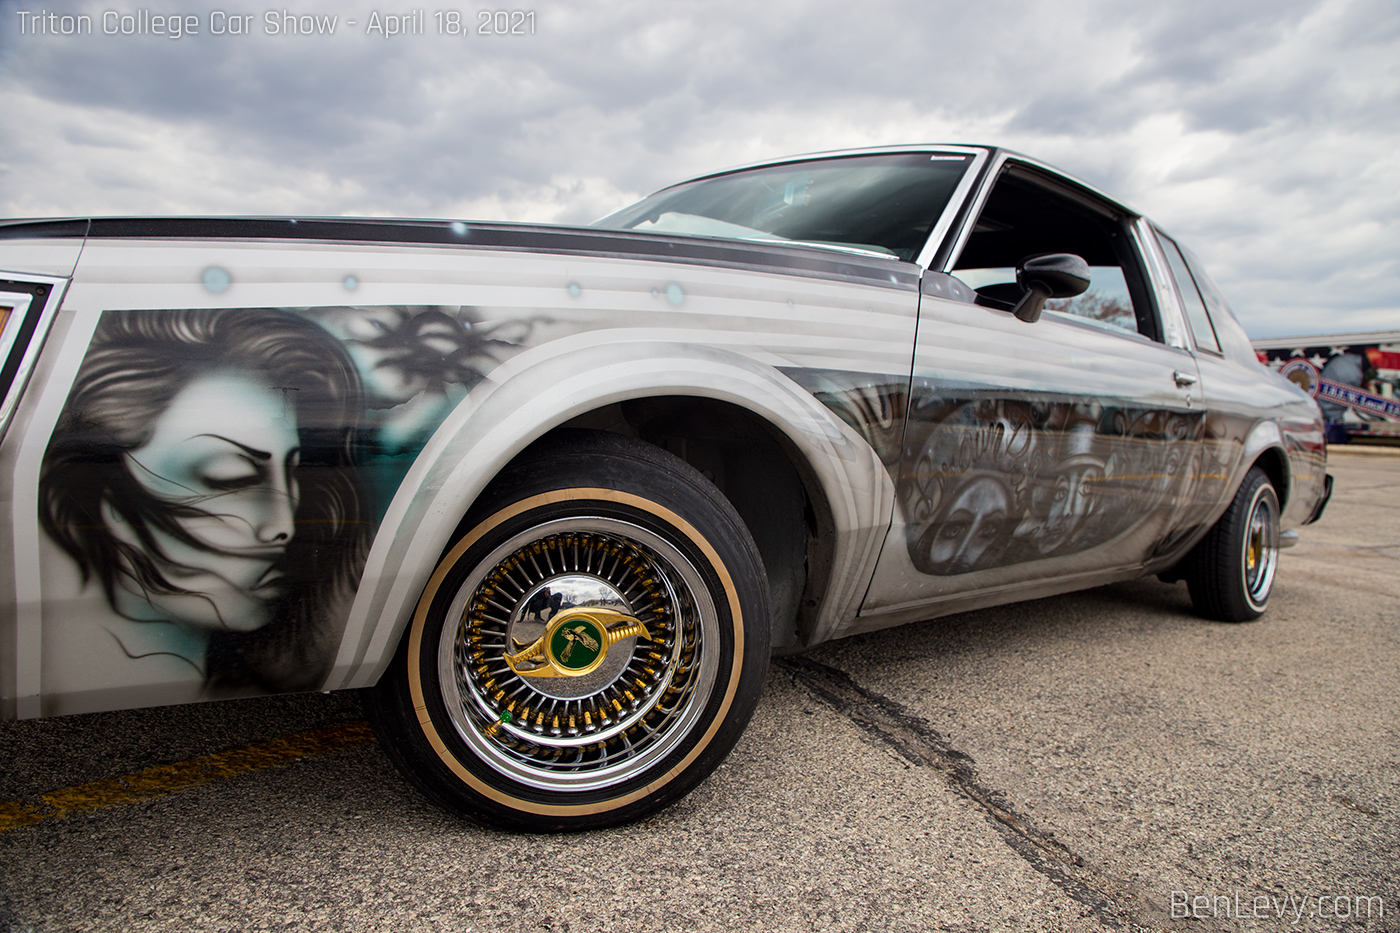 Woman Airbrushed on Buick Regal